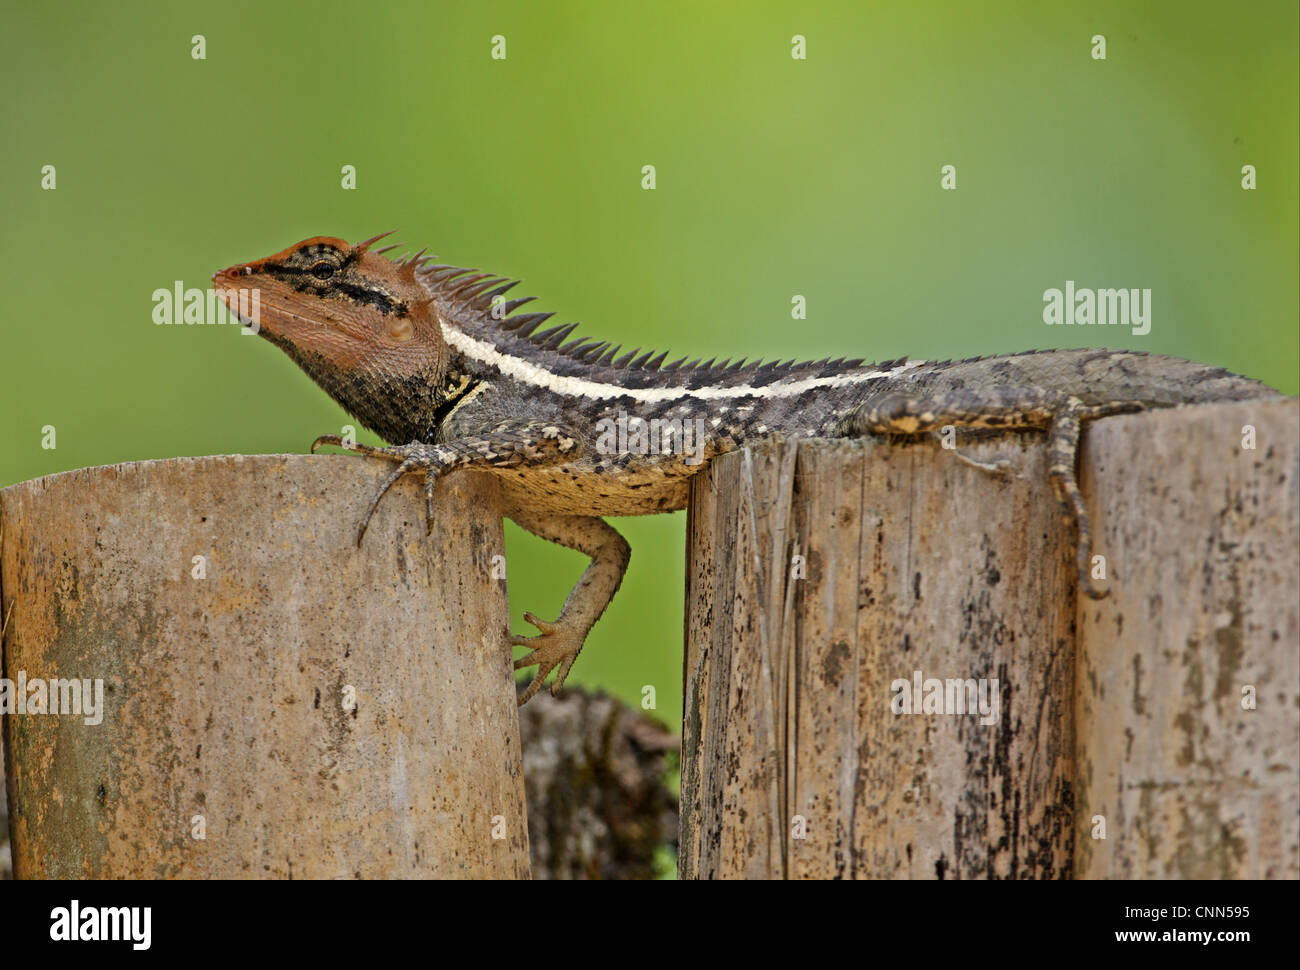 Forest Crested Agama (Calotes emma) adult male, resting on fence, Kaeng Krachan N.P., Thailand, february Stock Photo